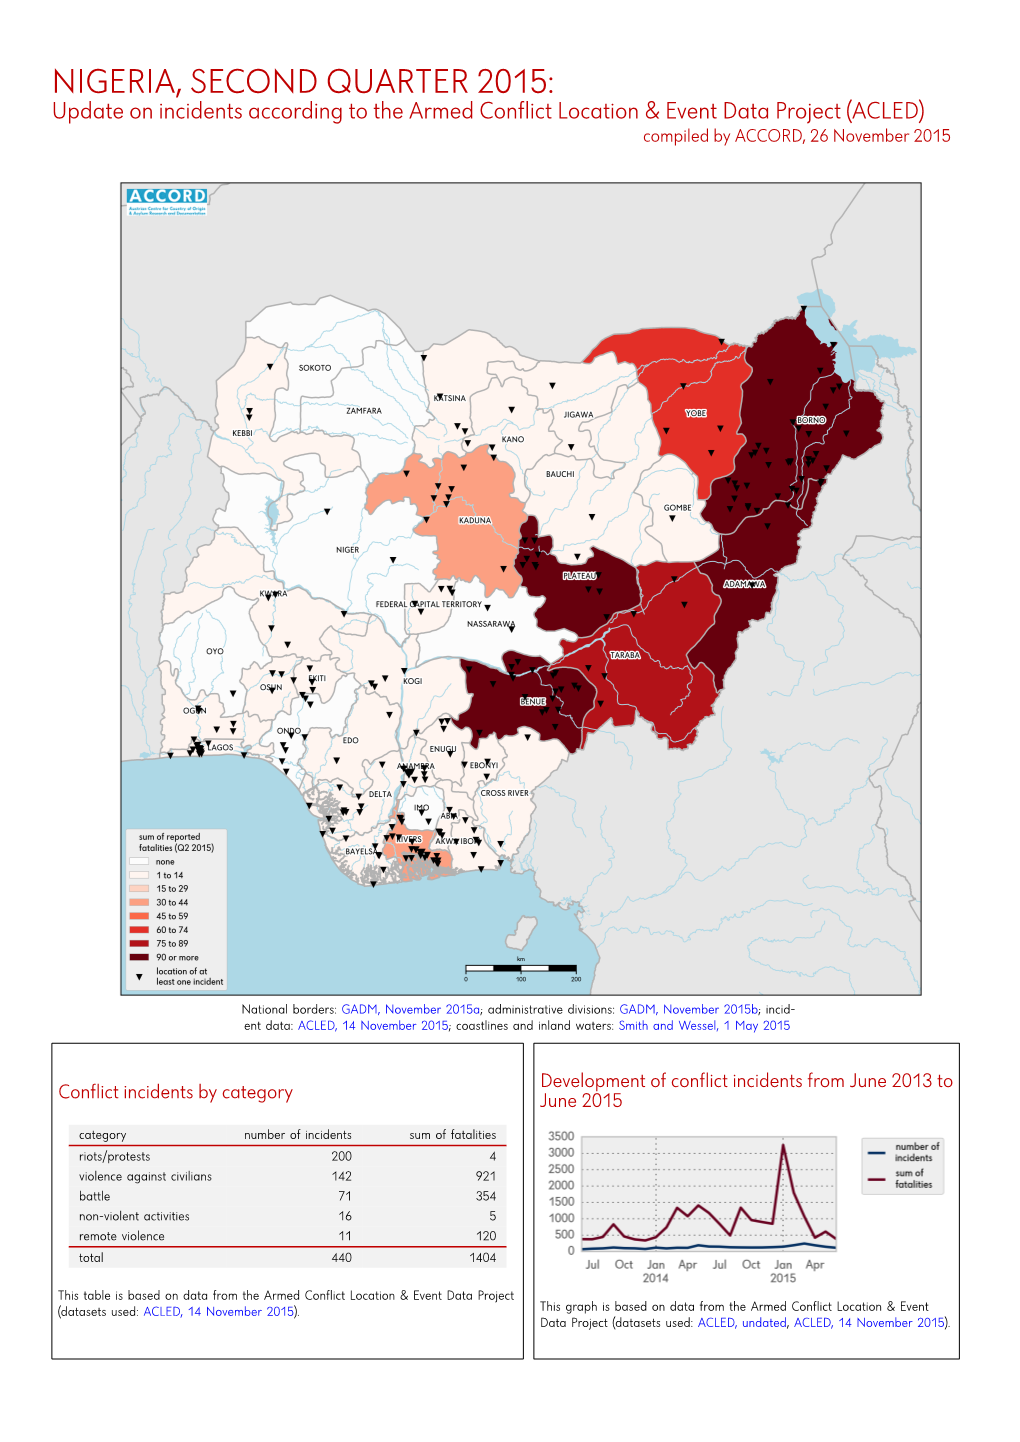 Nigeria, Second Quarter 2015: Update on Incidents According to the Armed Conflict Location & Event Data Project